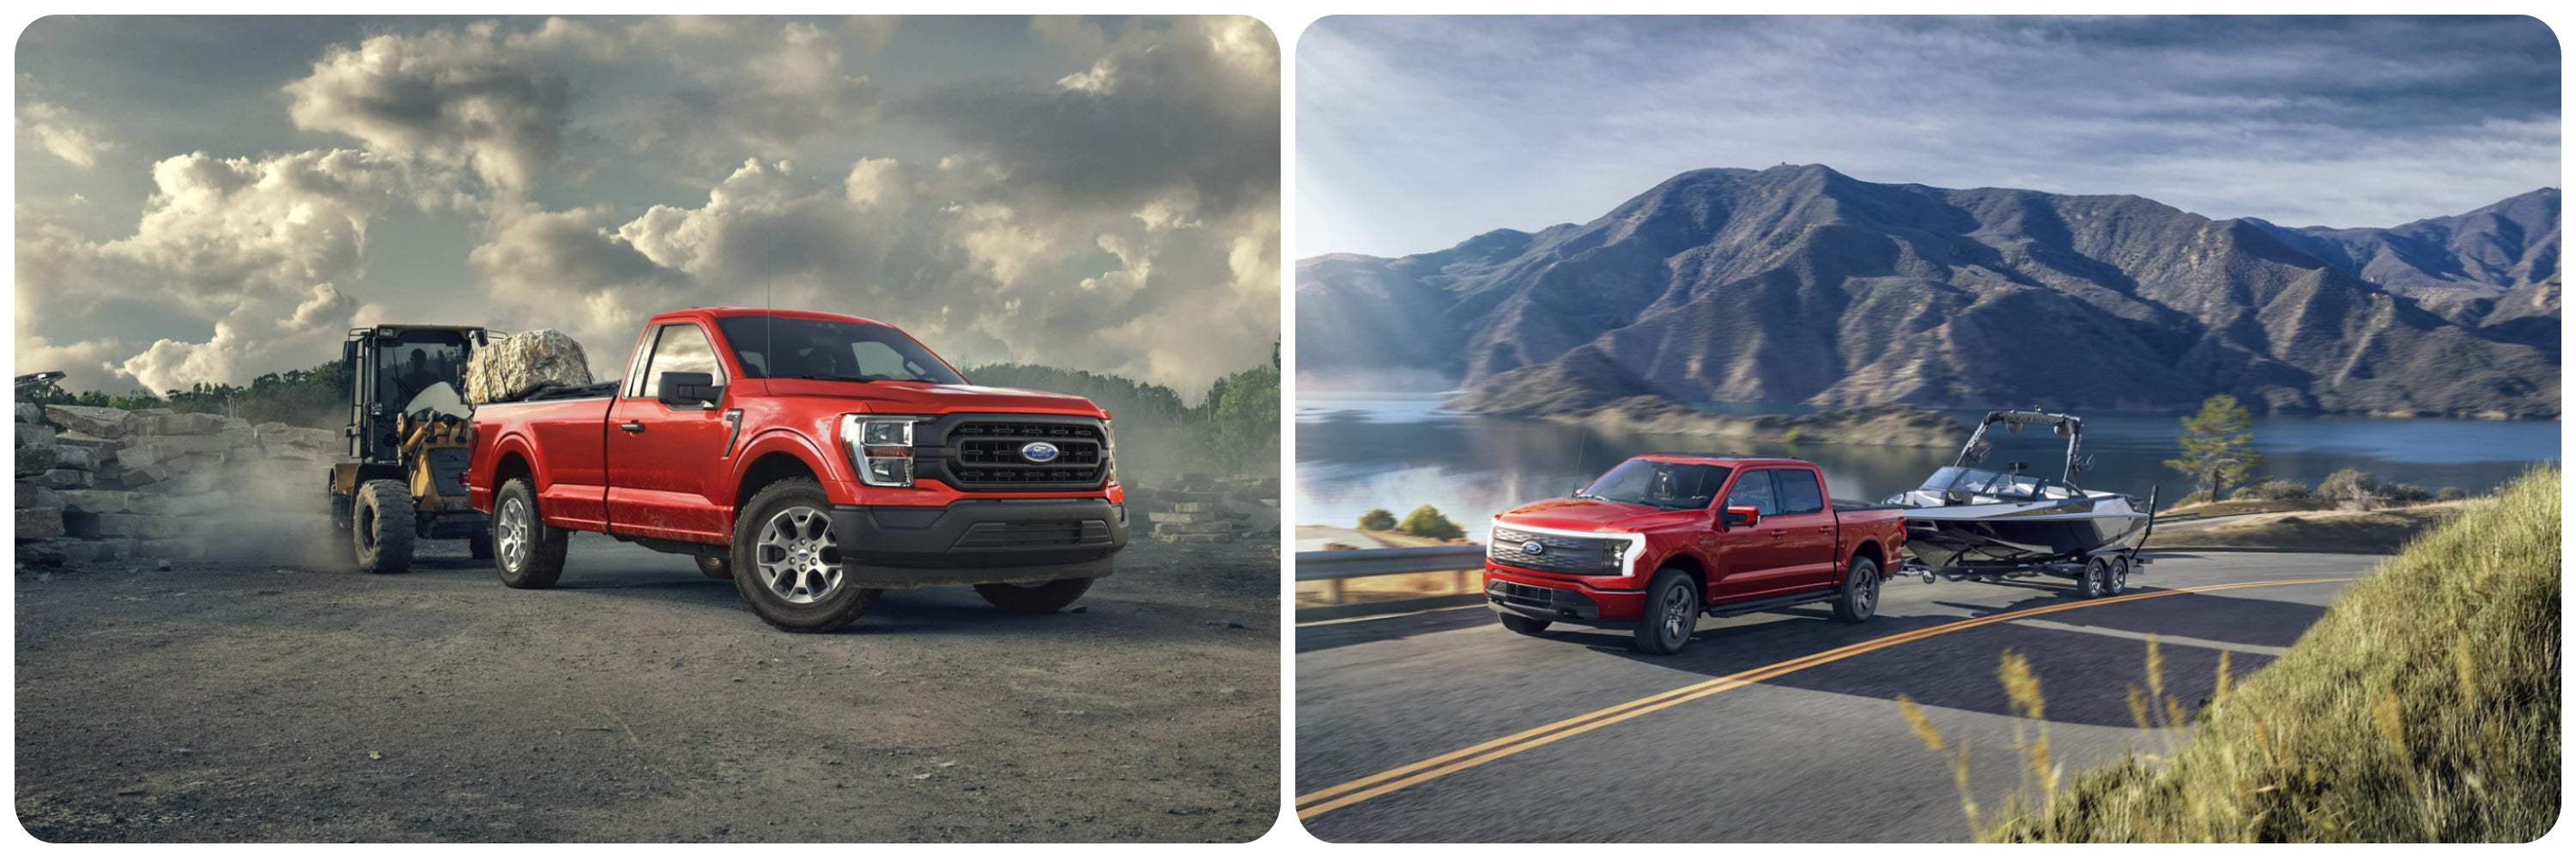 On the left a red 2023 Ford F-150 and on the right a red 2023 Ford F-150 Lightning